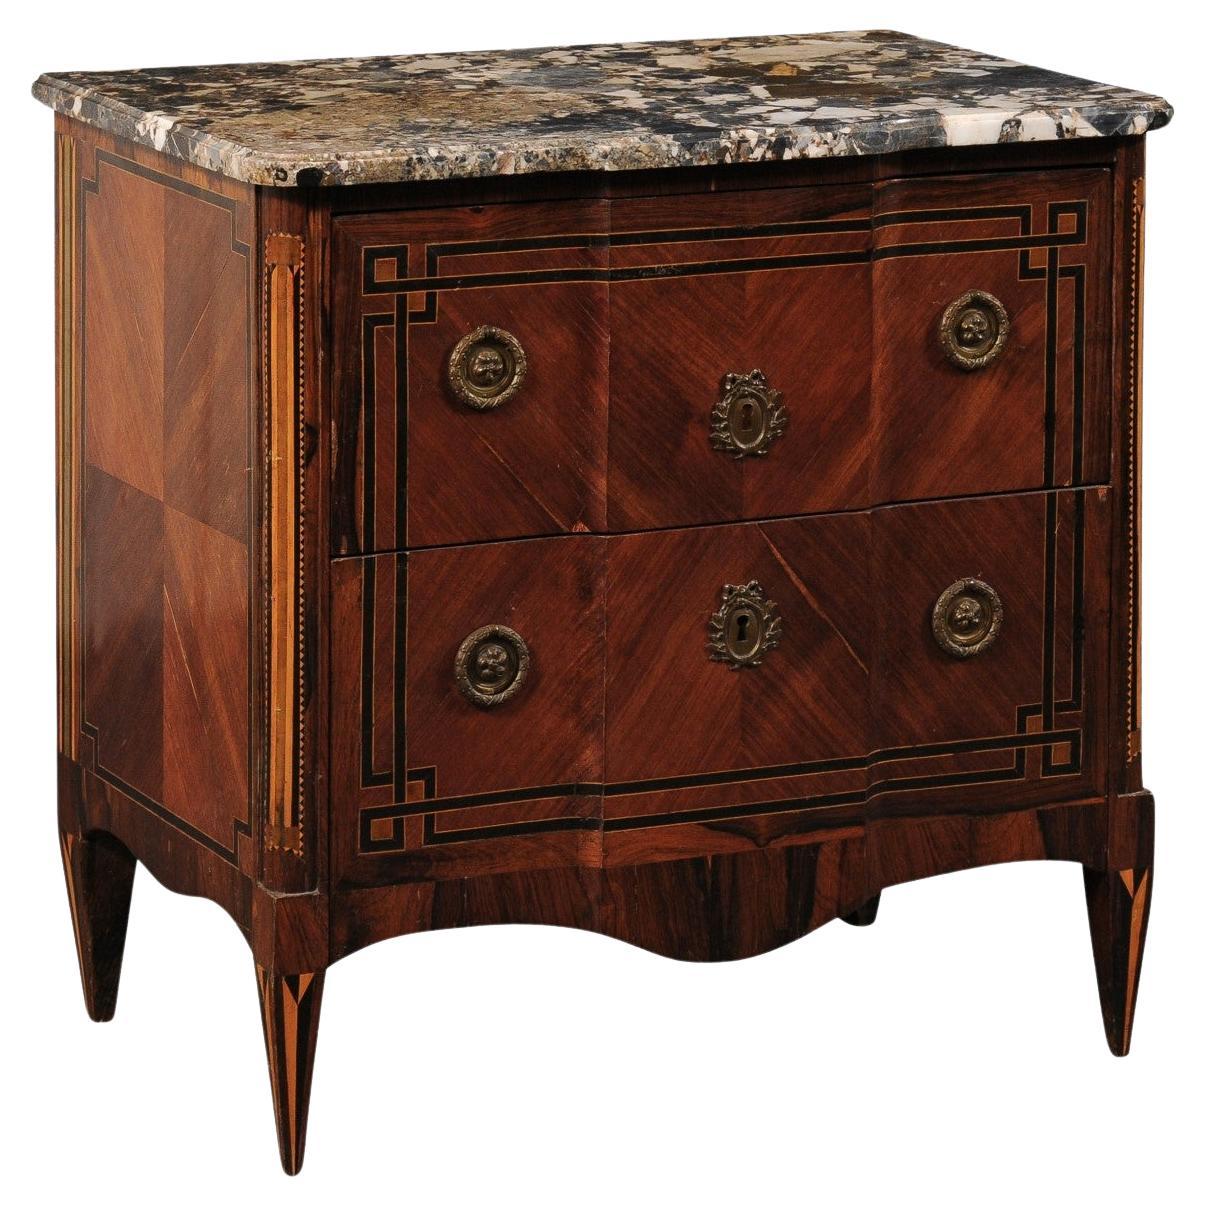 French Neoclassical Commode w/Subtle Breakfront & Gorgeous Marble Top, 19th C.